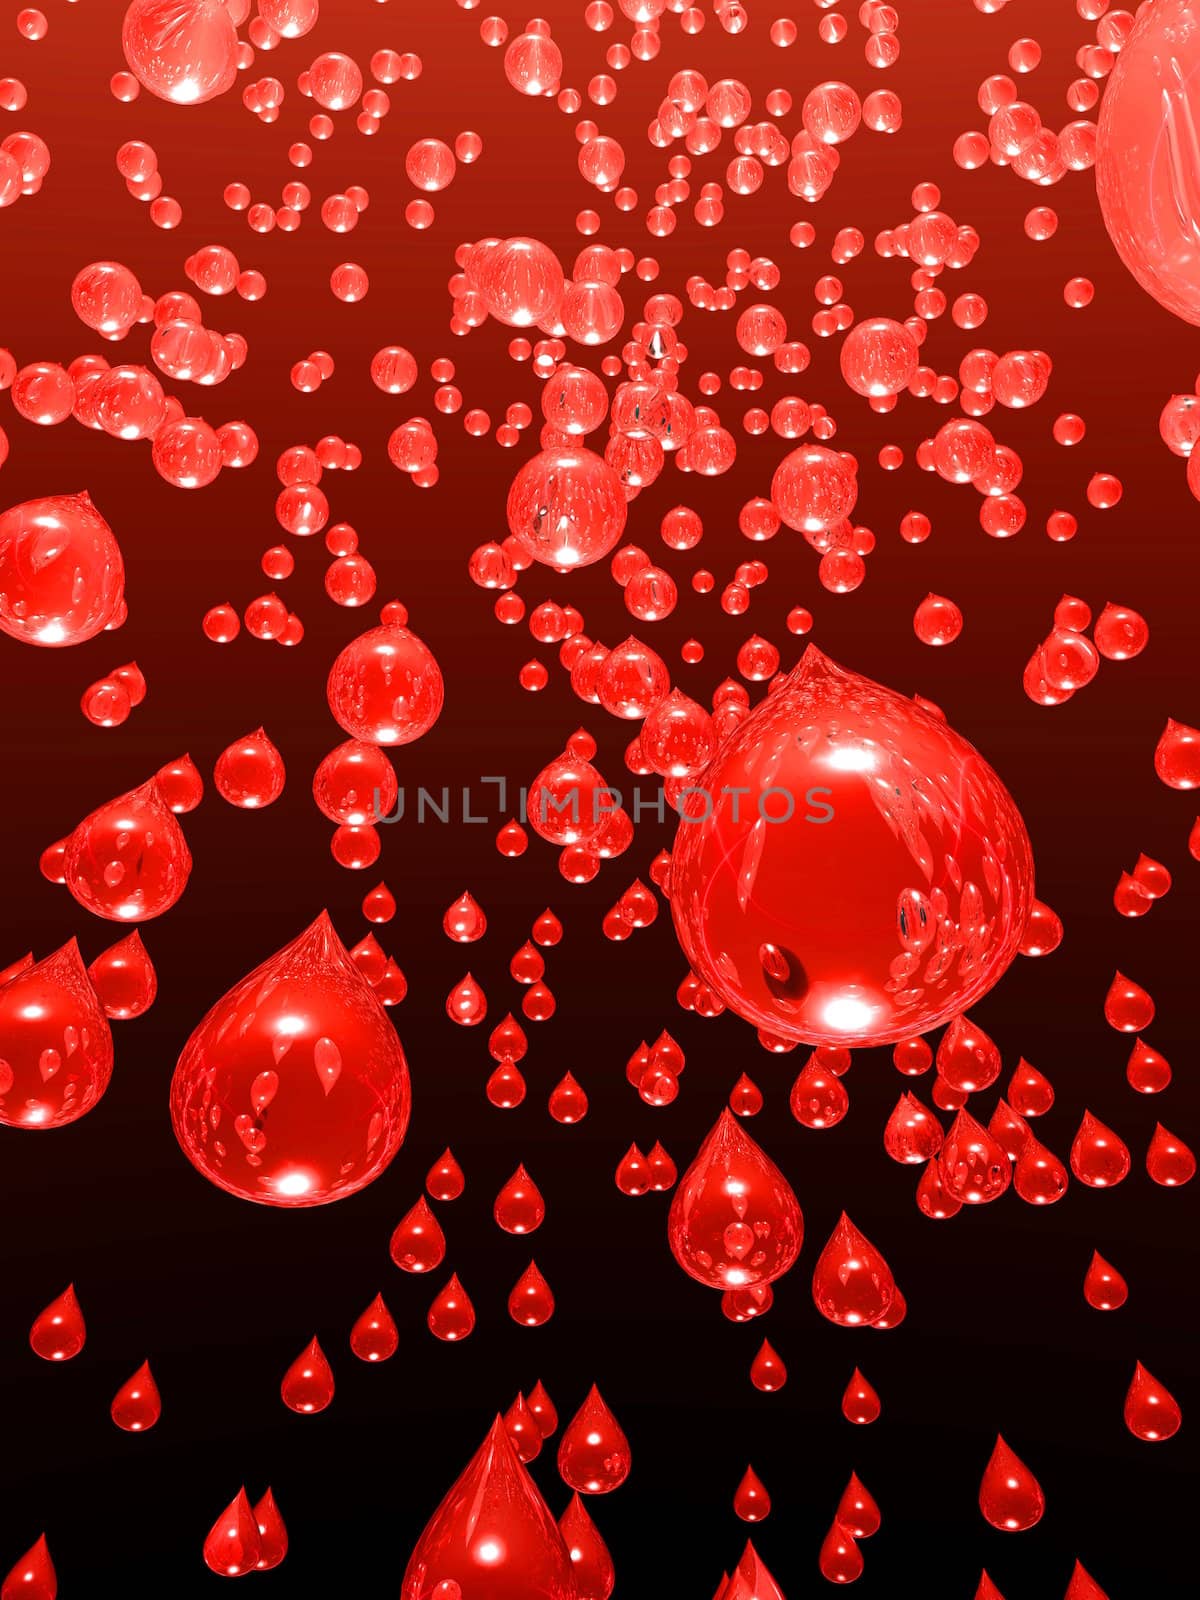 An illustration of strawberry juice raining from the sky.